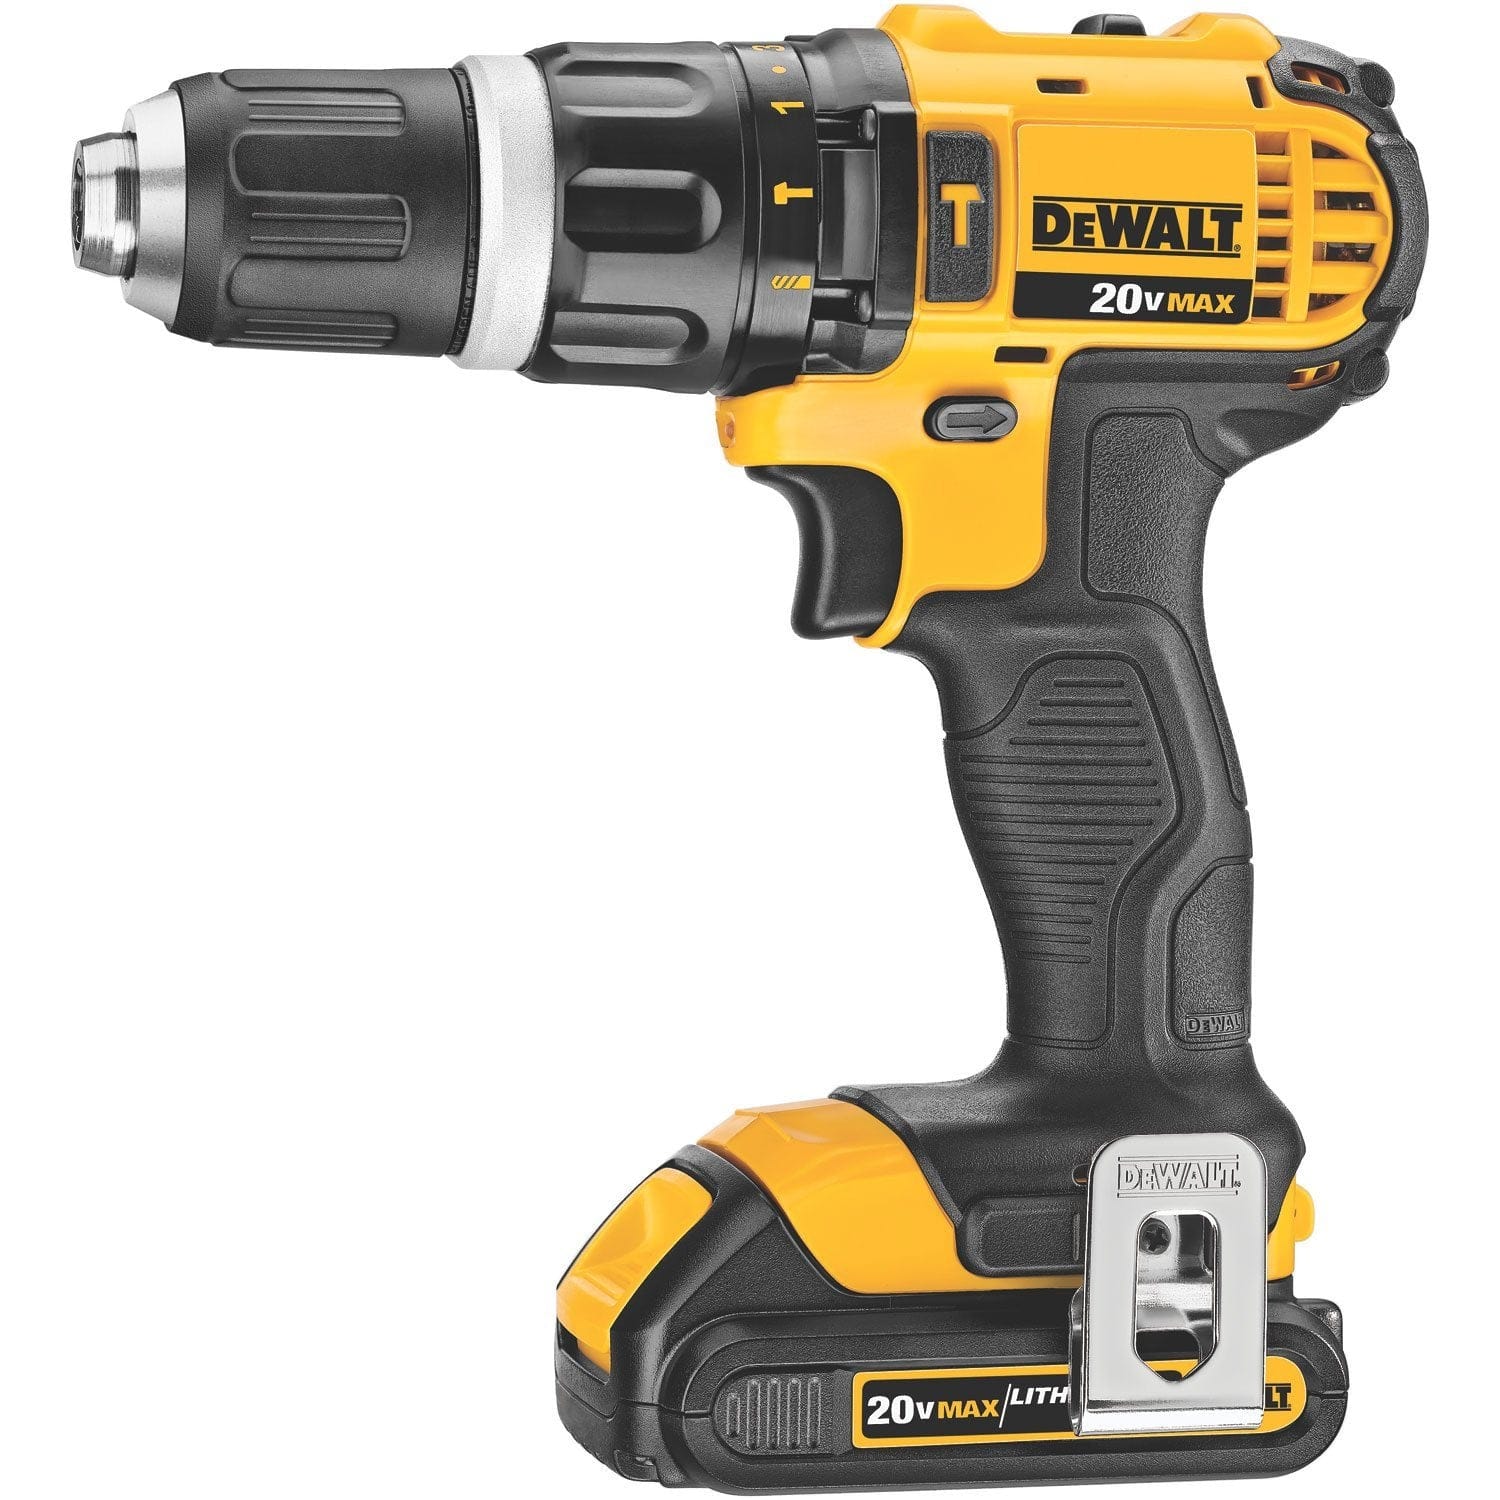 Dewalt 20V Max Lithium Ion Compact Hammerdrill Kit (1.5 AH) 13 MM Cordless Hammer Drill / Drill Driver - High Performance Motor Delivers Power And Ability Completing A Wide Range Of Applications - DCD785C2